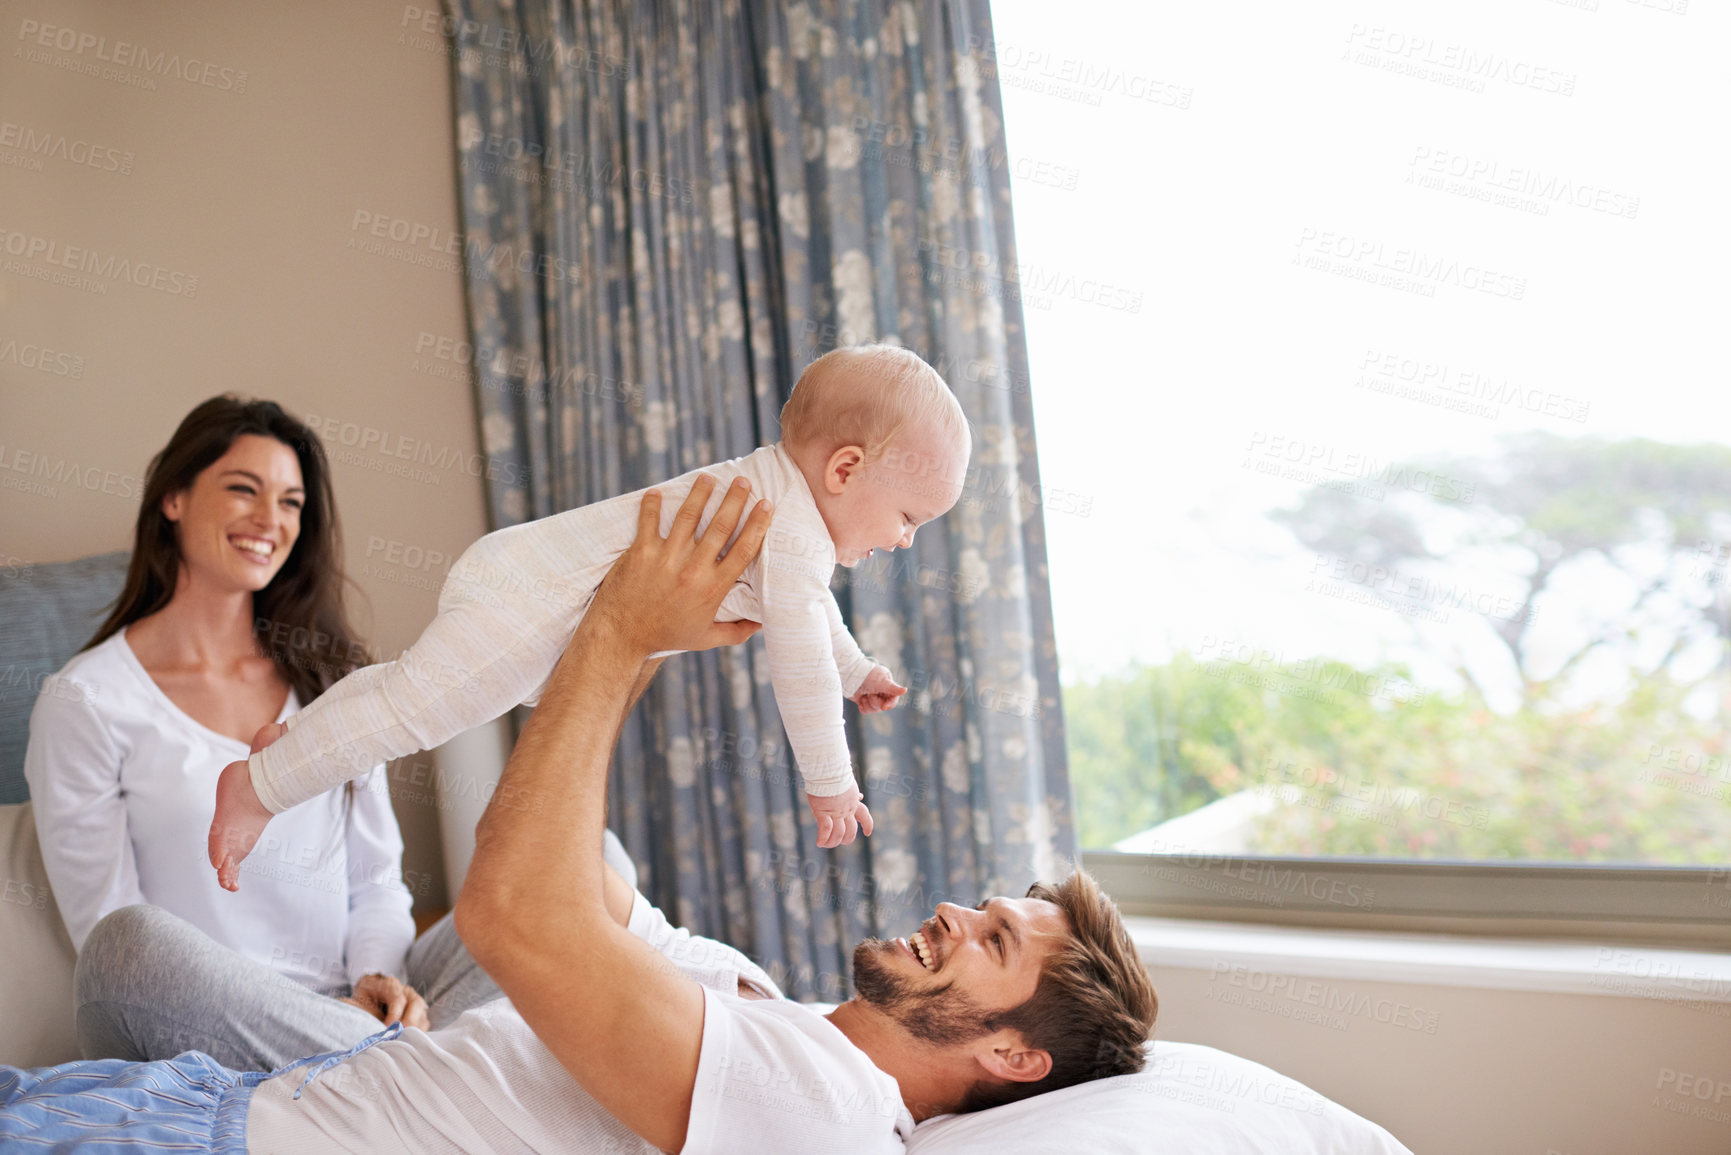 Buy stock photo Happy family playing with baby in air, bedroom and fun of love, care and quality time to relax together at home. Mom, dad and holding playful infant kid for happiness, support and newborn development